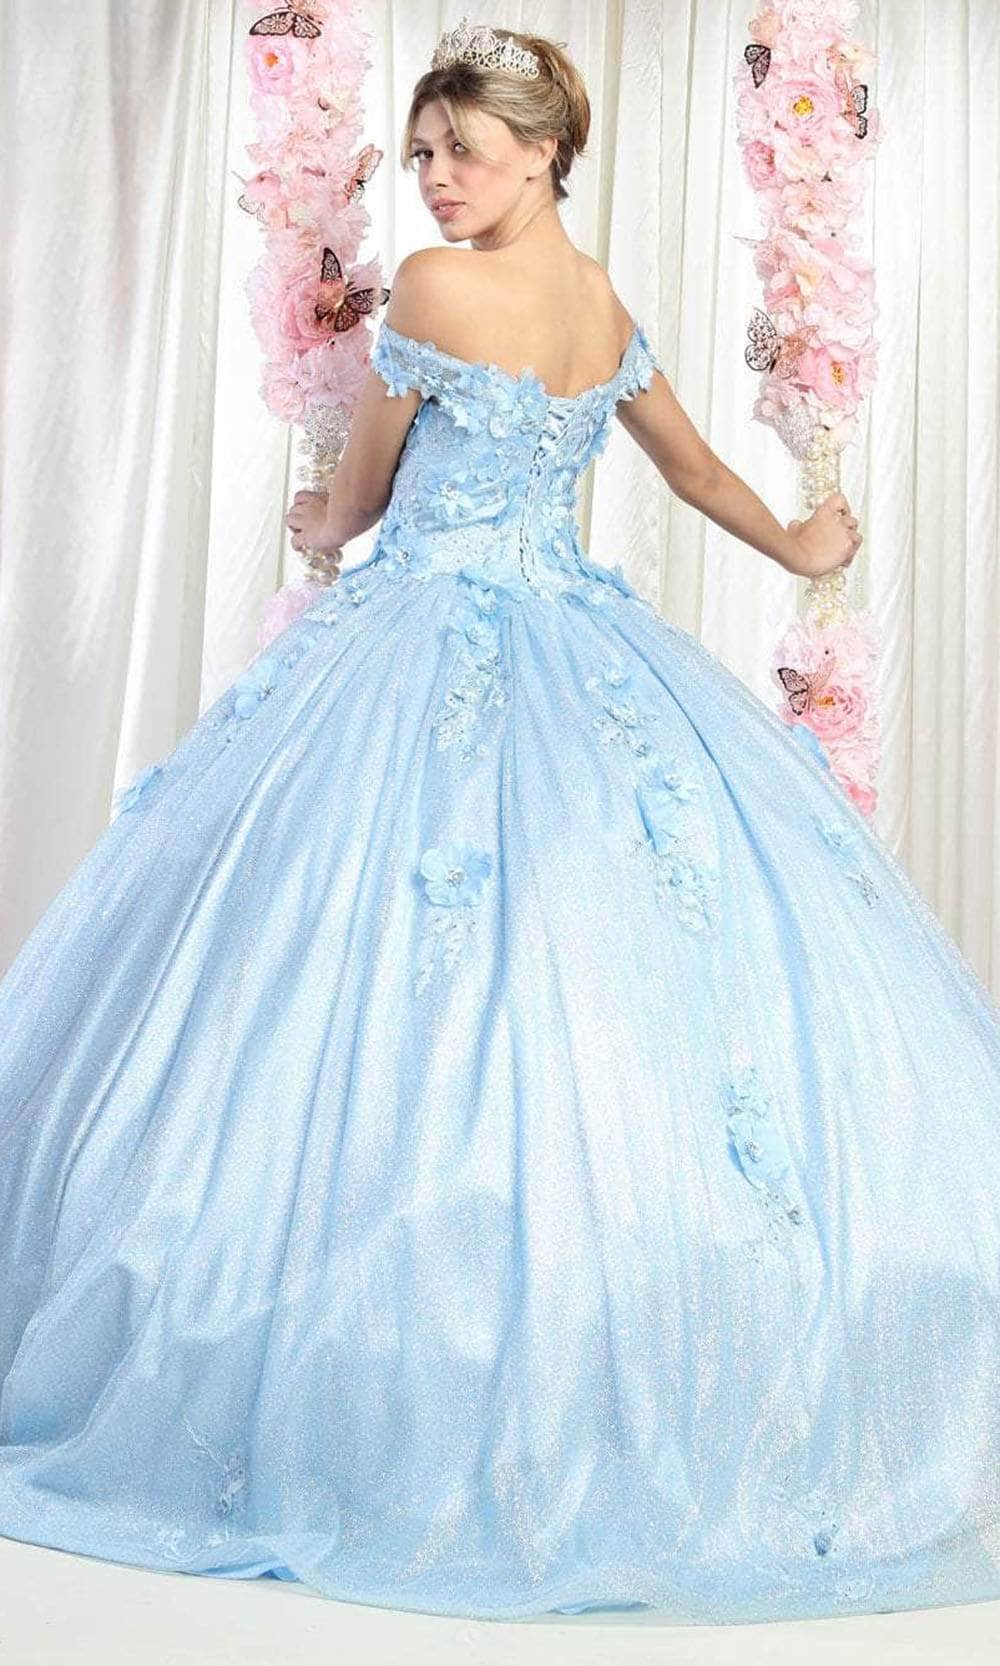 May Queen LK161 - Off Shoulder Floral Prom Ballgown Ball Gowns